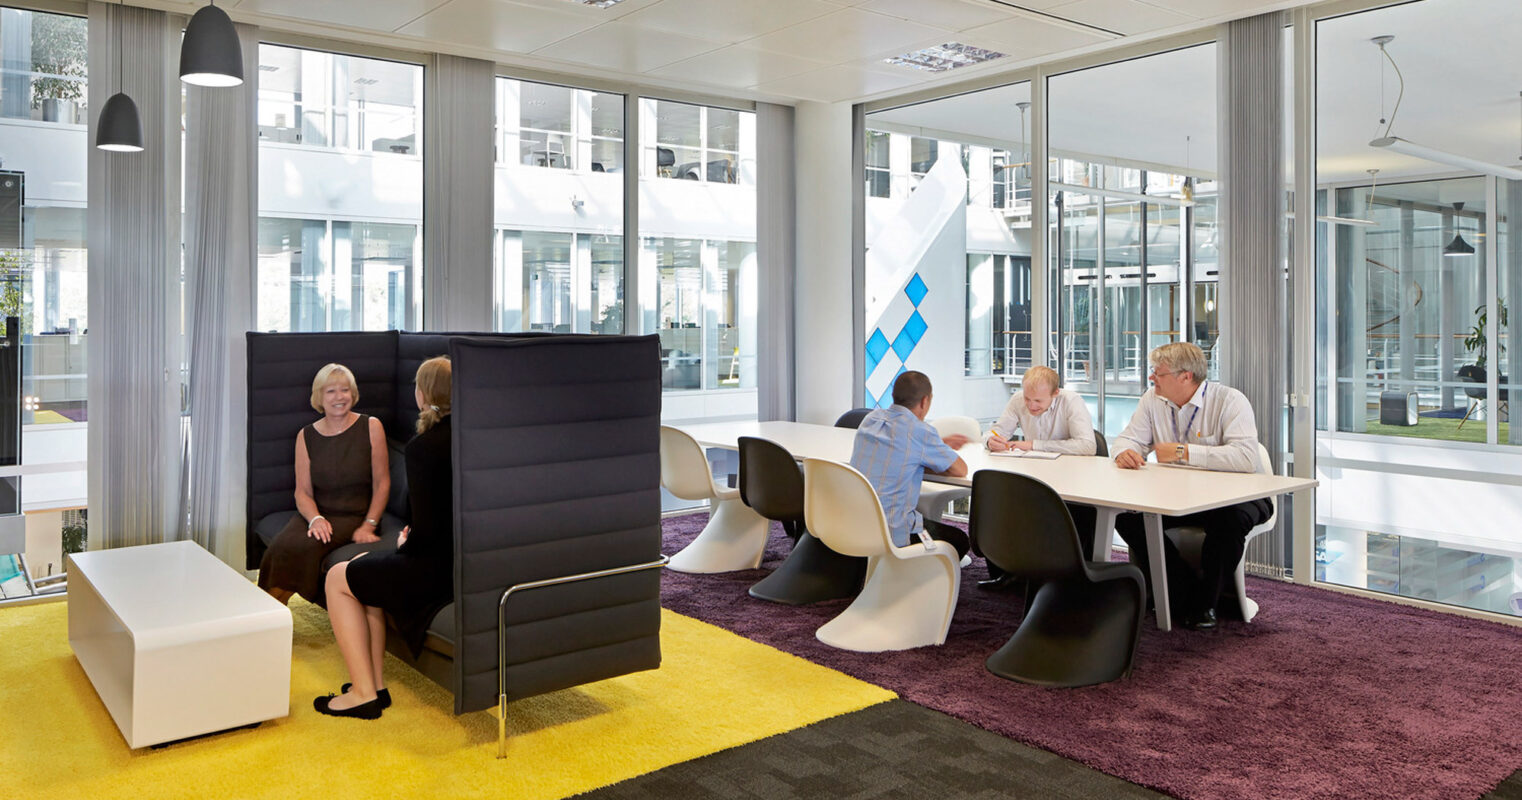 Modern office breakout area featuring high-back acoustic seating for privacy, vibrant yellow and purple floor mats for zoning, and white minimalistic side tables. The glass walls provide transparency, while pendant lighting adds to the contemporary ambiance.